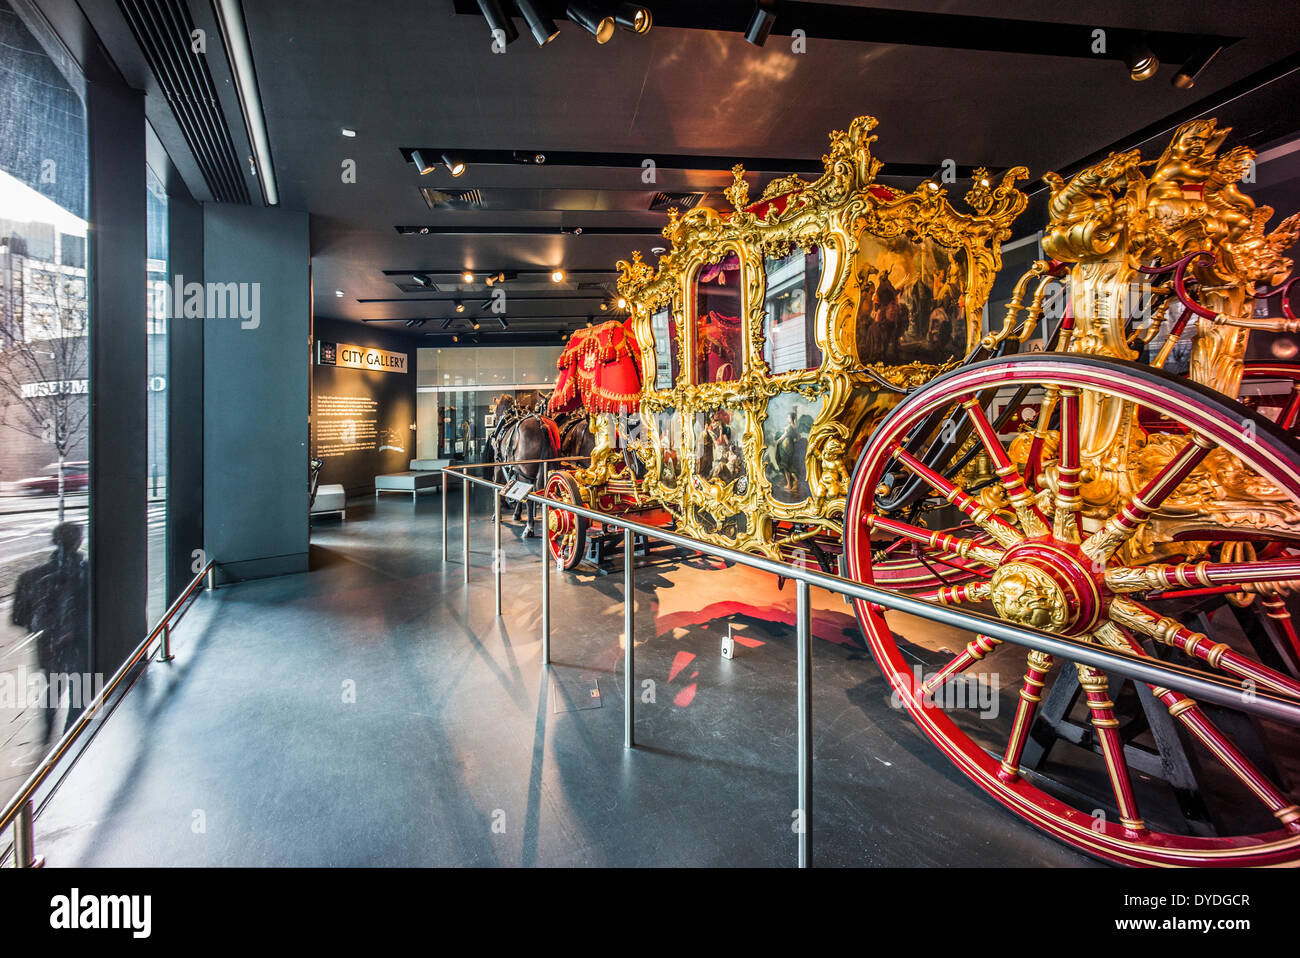 The Lord Mayor of London's State Coach in the Museum of London. Stock Photo